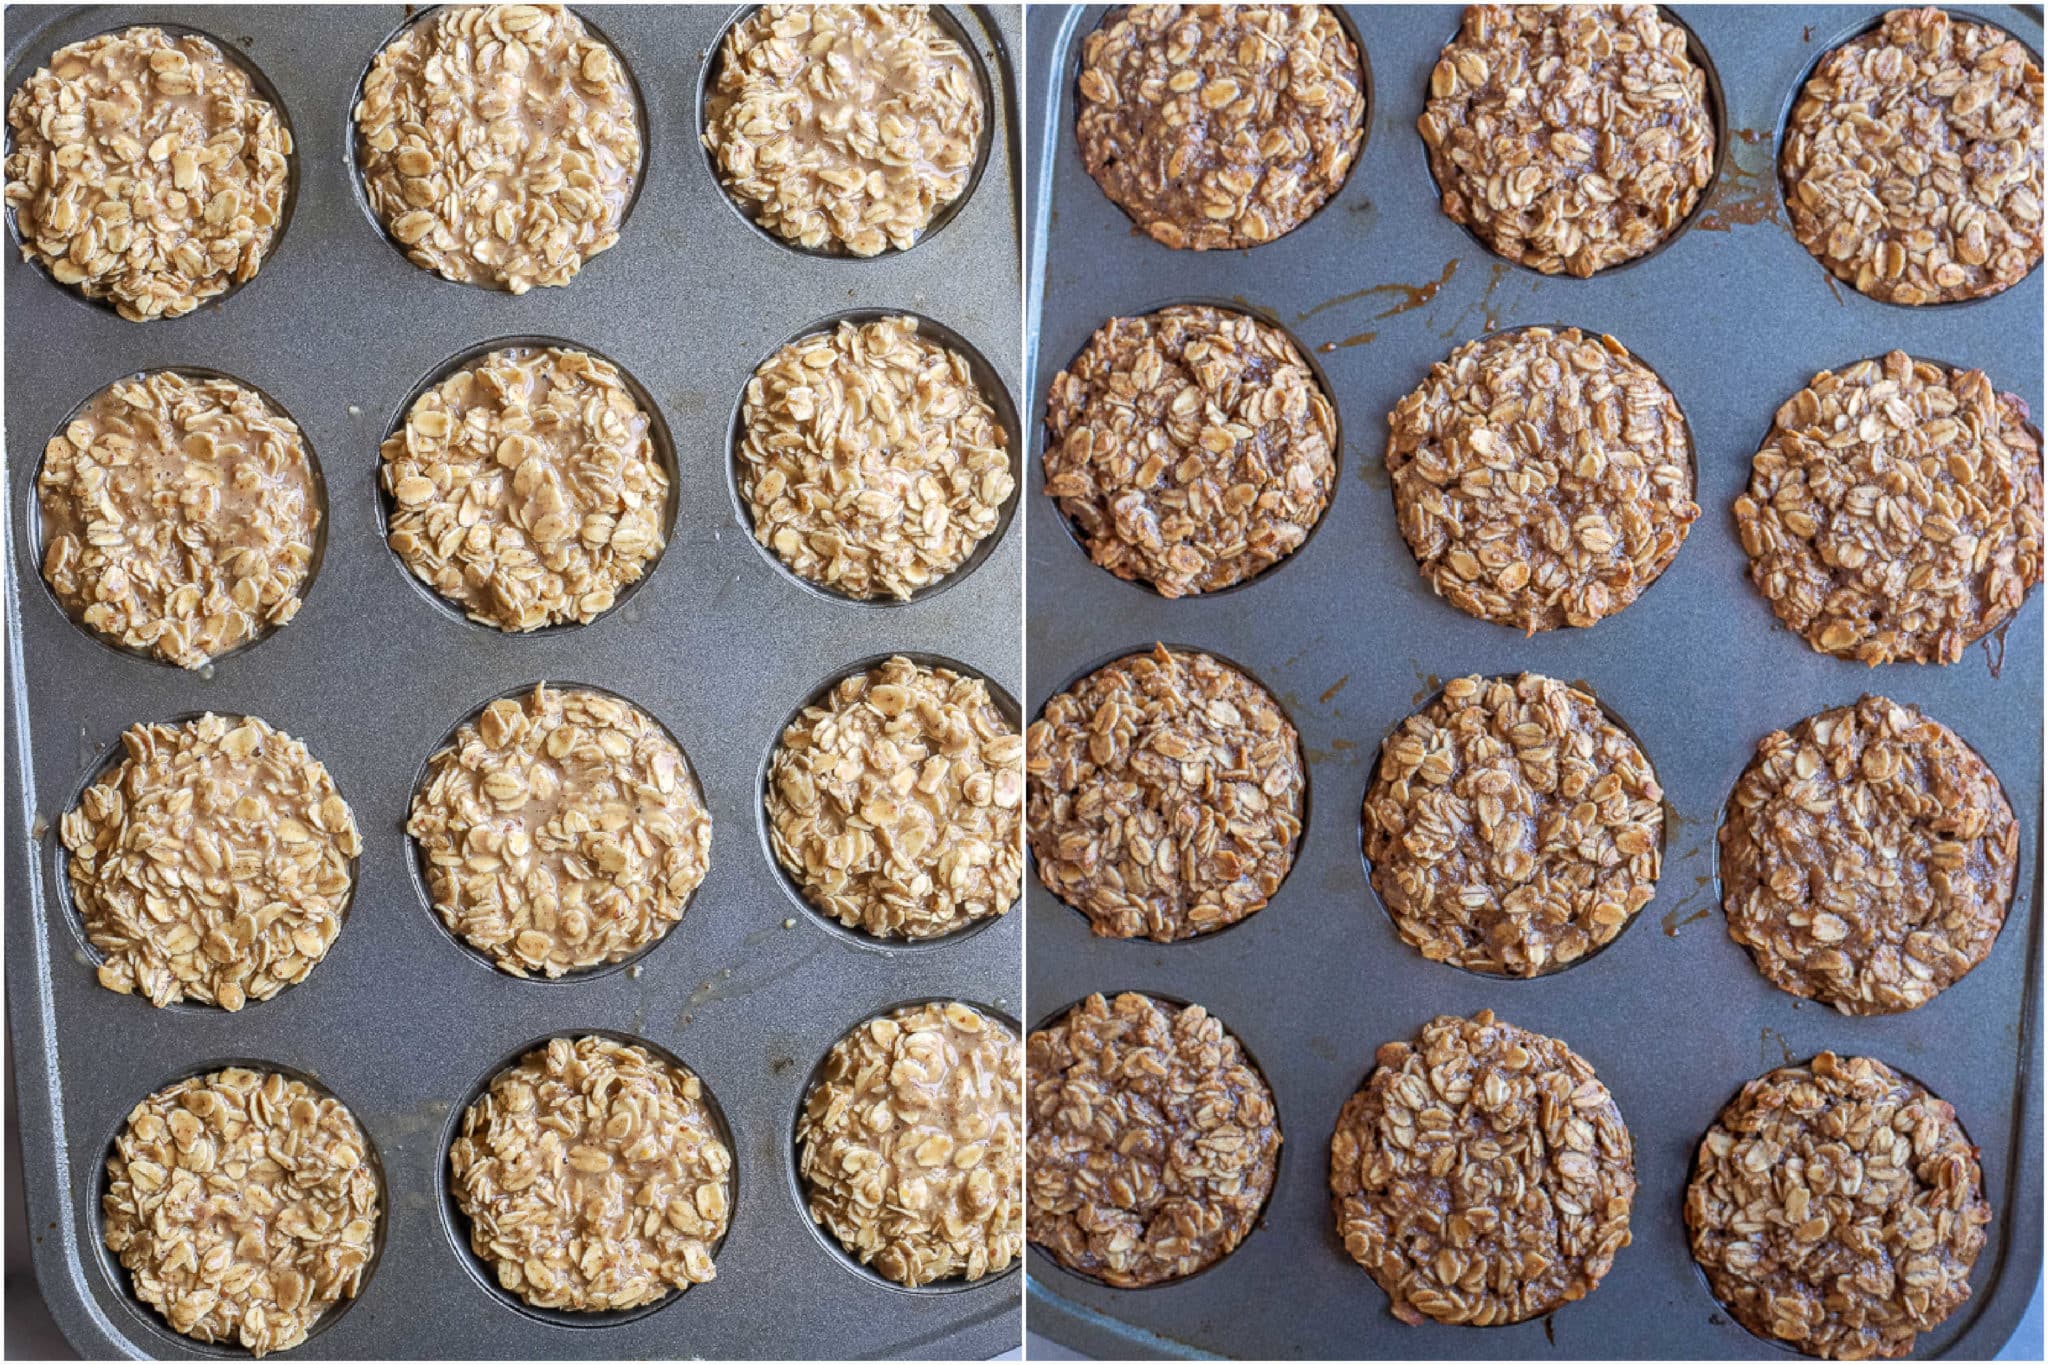 baked oatmeal cups before and after they have been baked